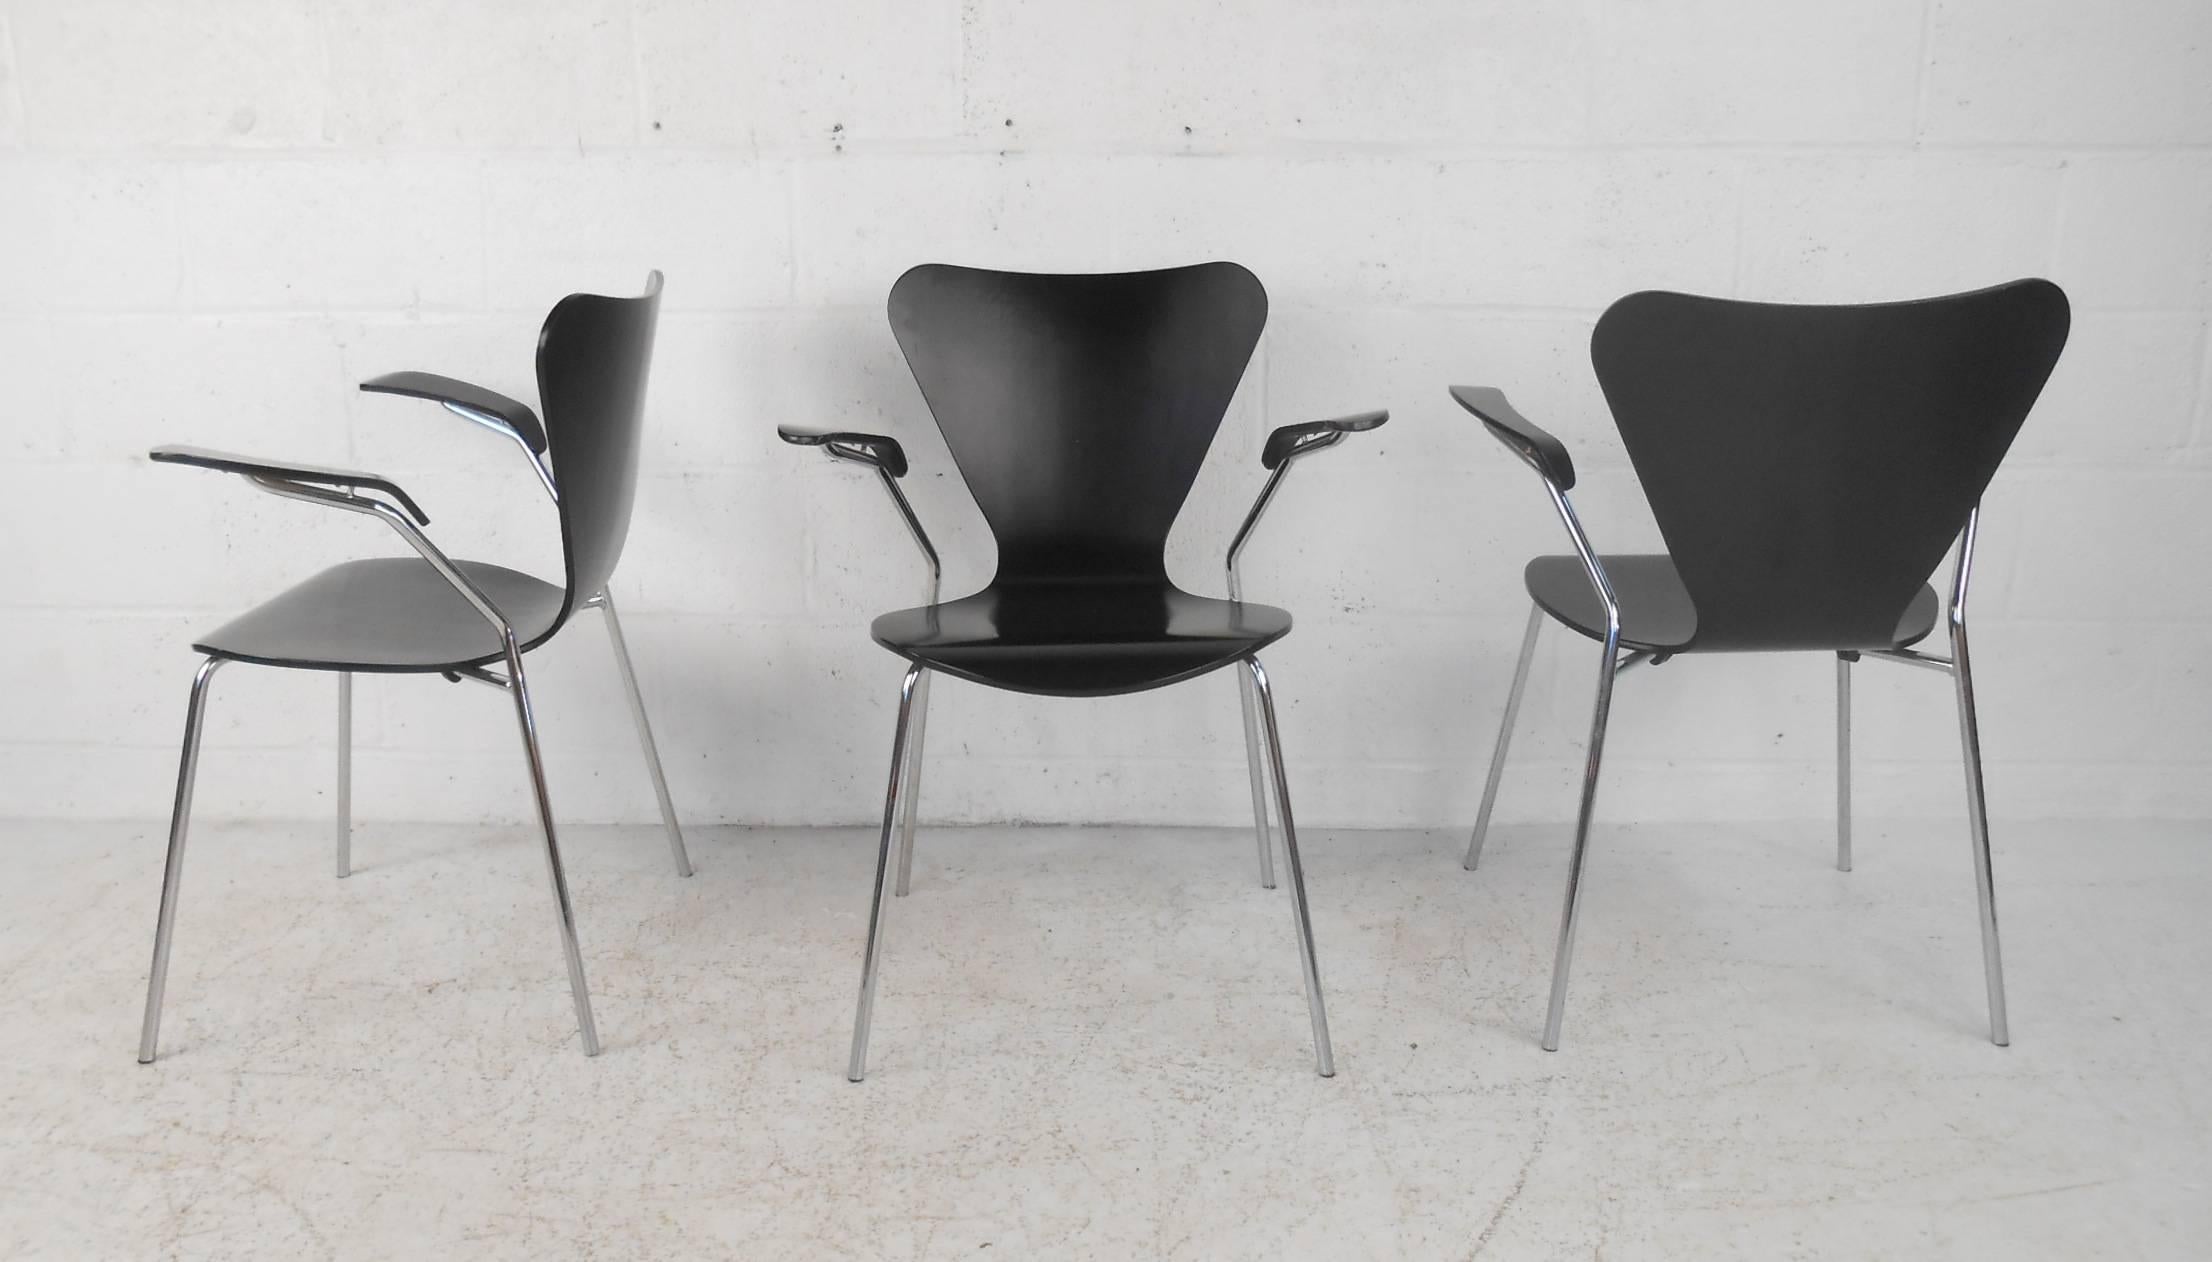 This beautiful vintage modern set of three chairs feature unique winged back rests, high arm rests, and bent rod chrome frames. Sleek design has bent black wood seating with the perfect contours ensuring maximum comfort. Unusual angled arm rests and